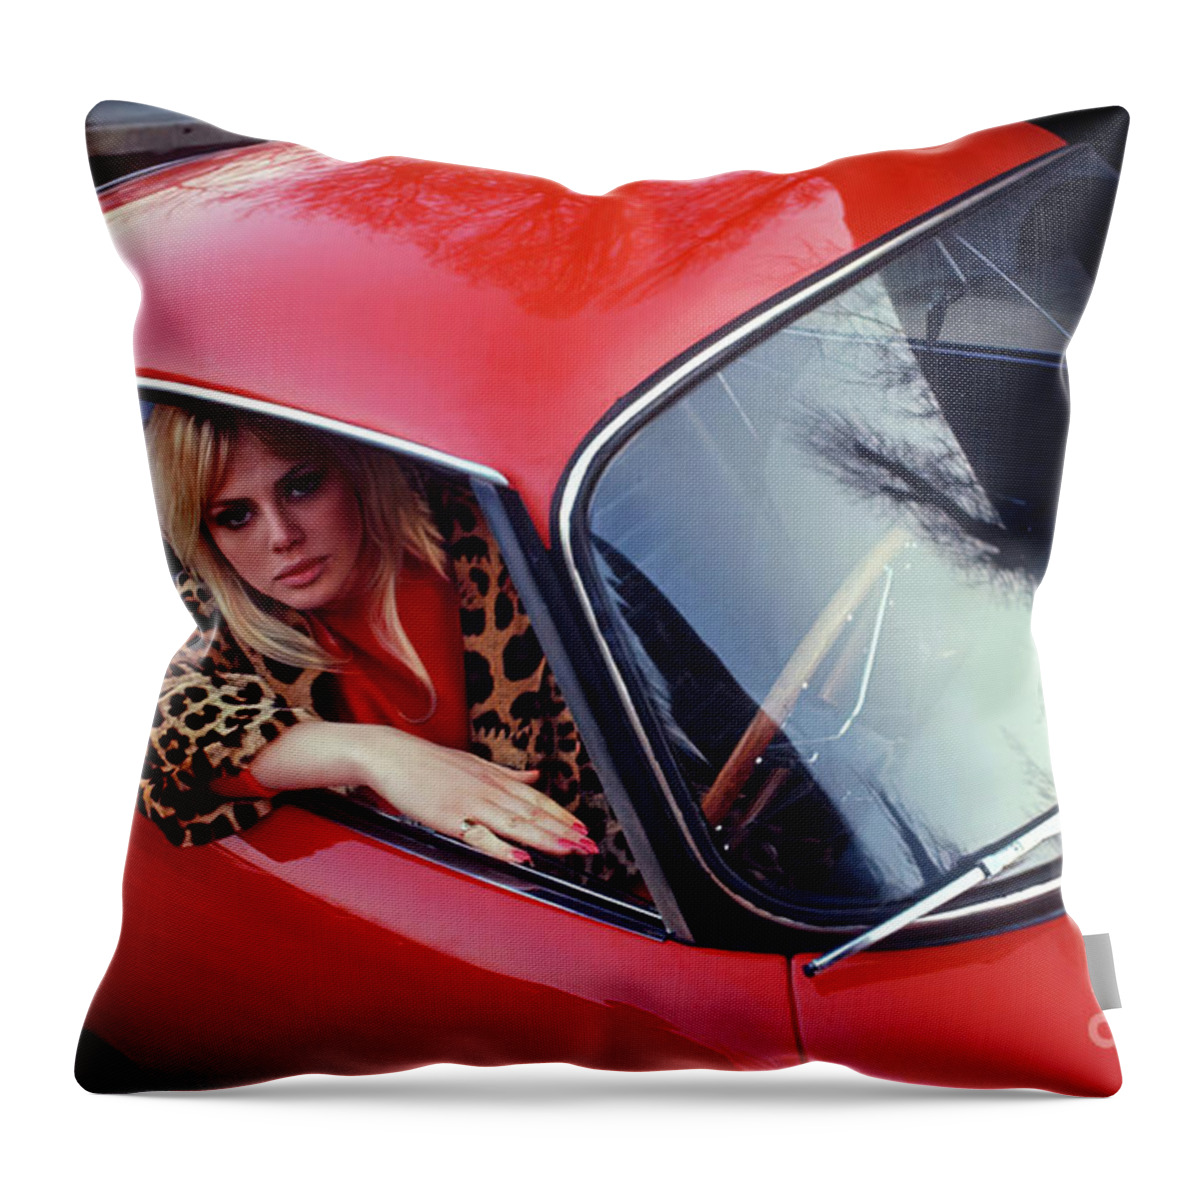 Vintage Throw Pillow featuring the photograph 1960s Lotus Elite With Model by Retrographs